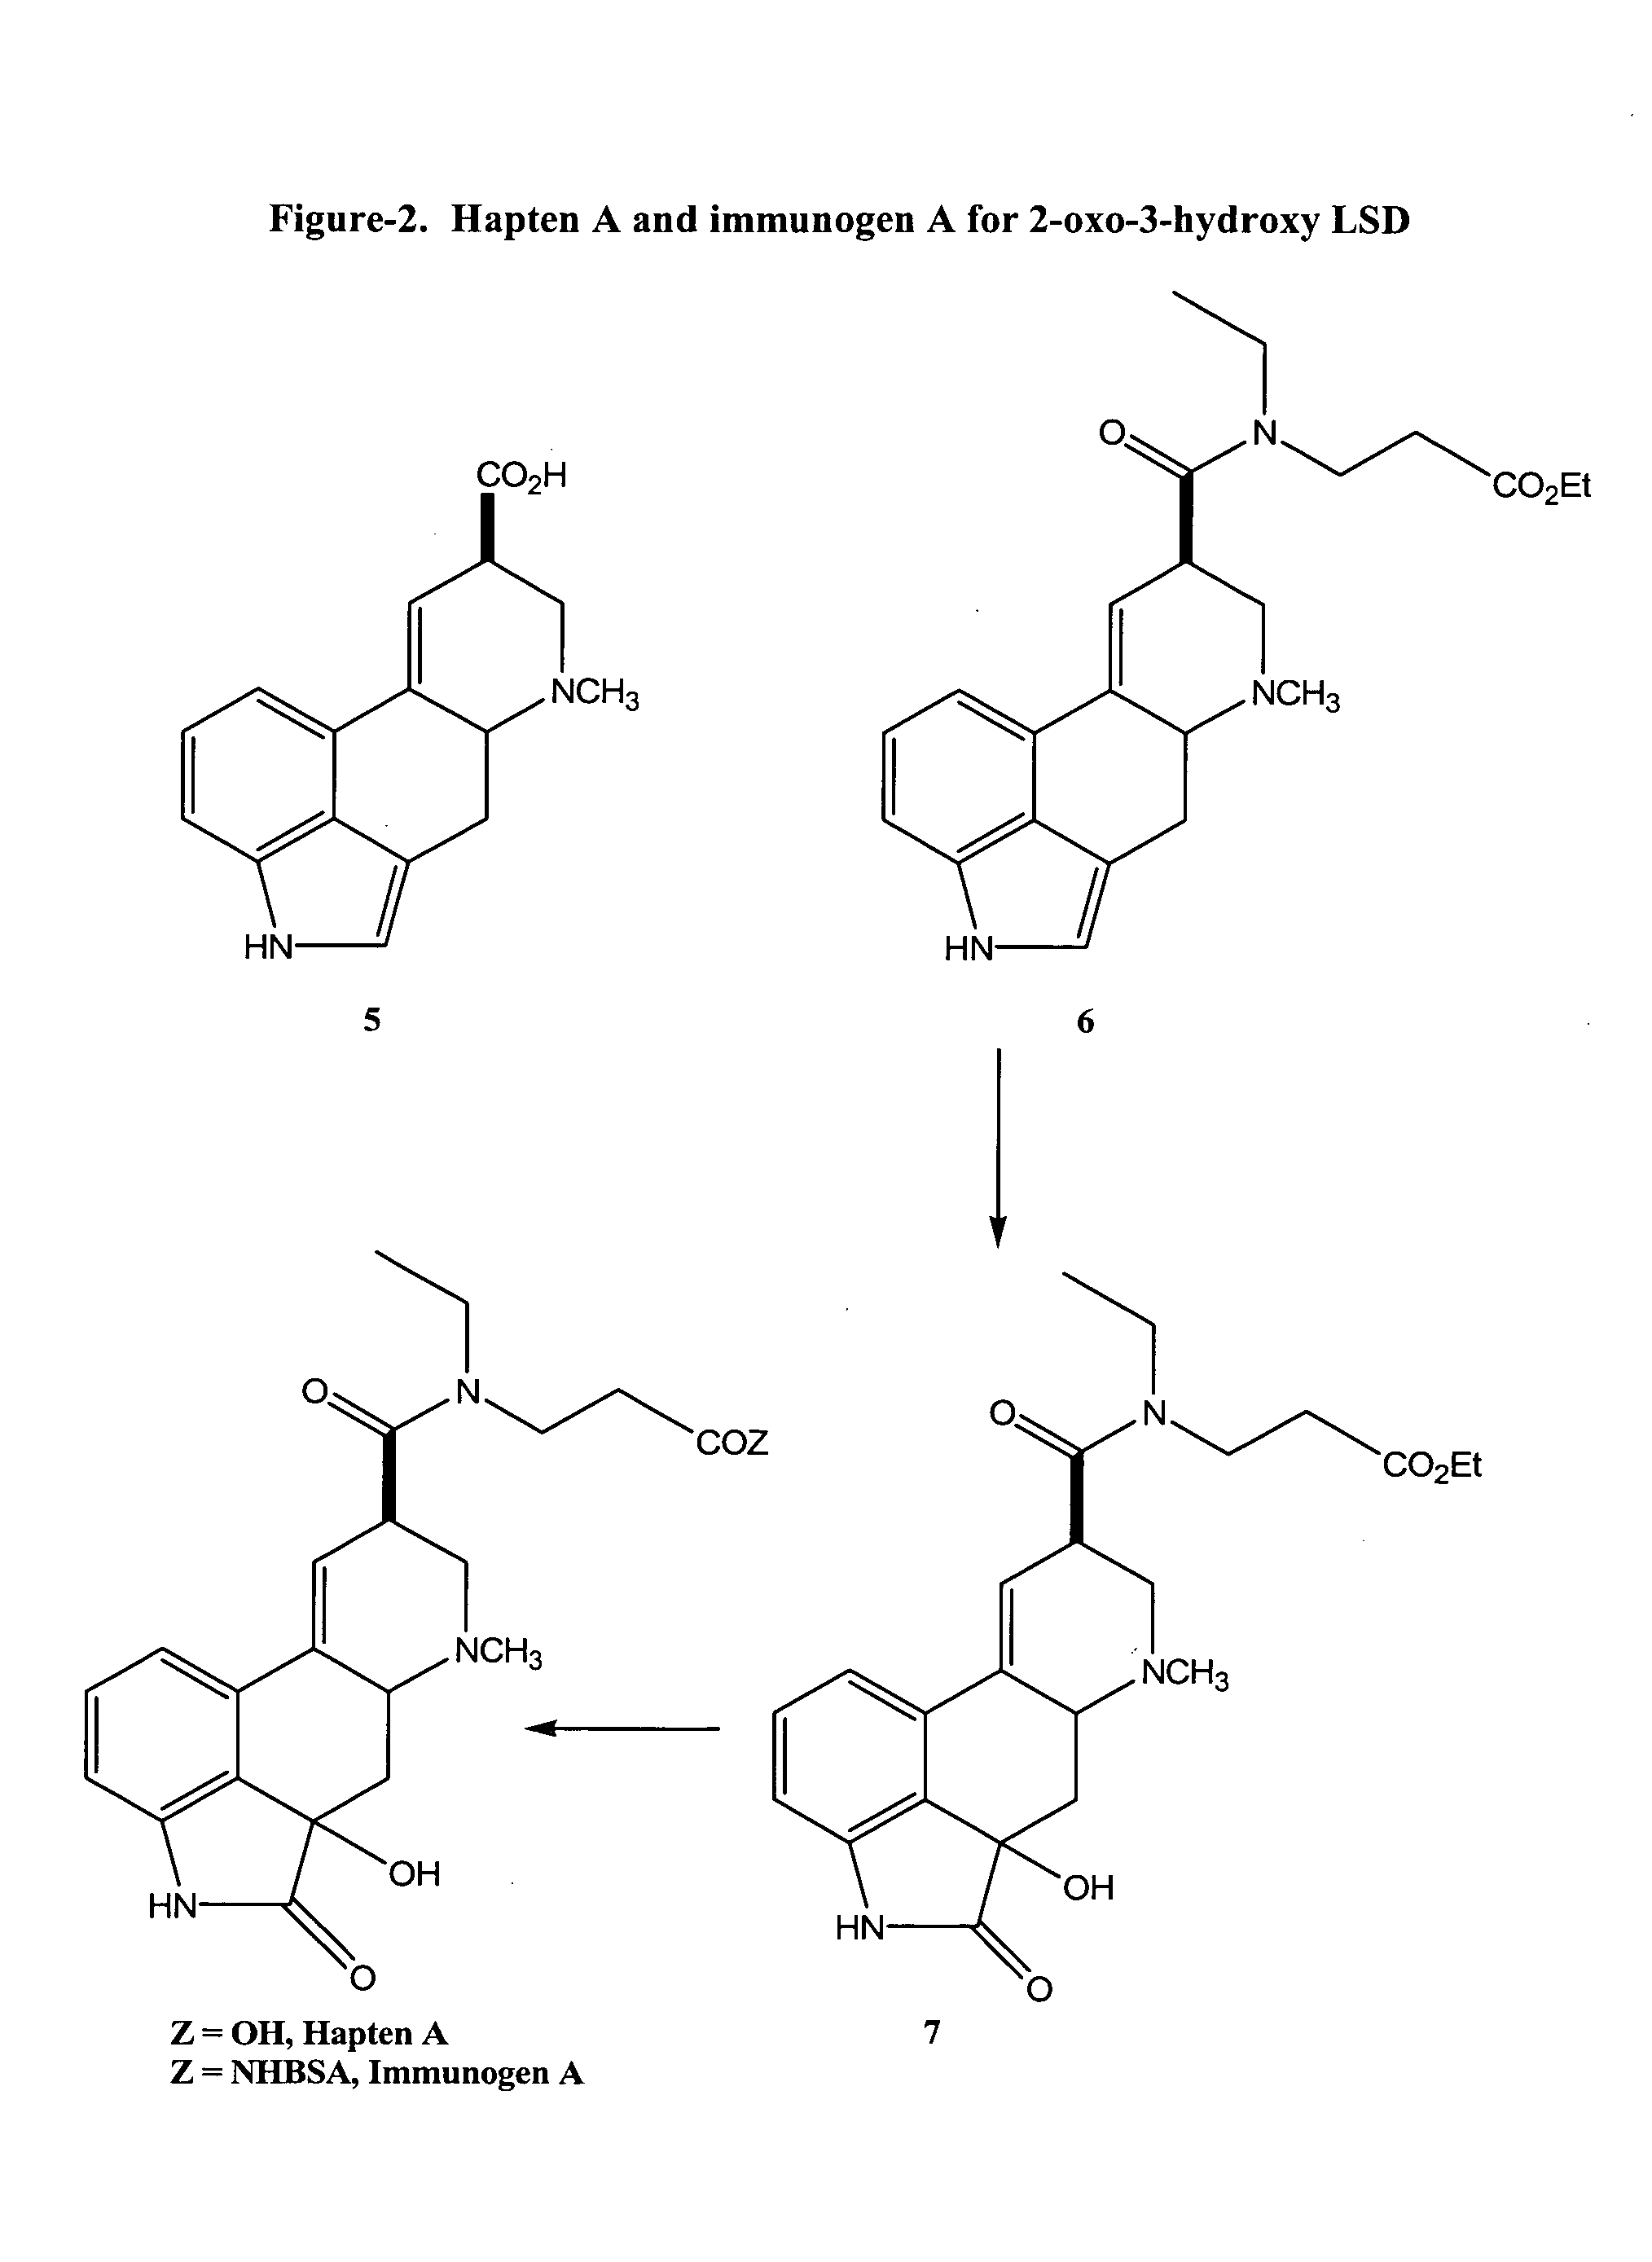 Haptens, immunogens, antibodies and conjugates to 2-oxo-3-hydroxy-LSD